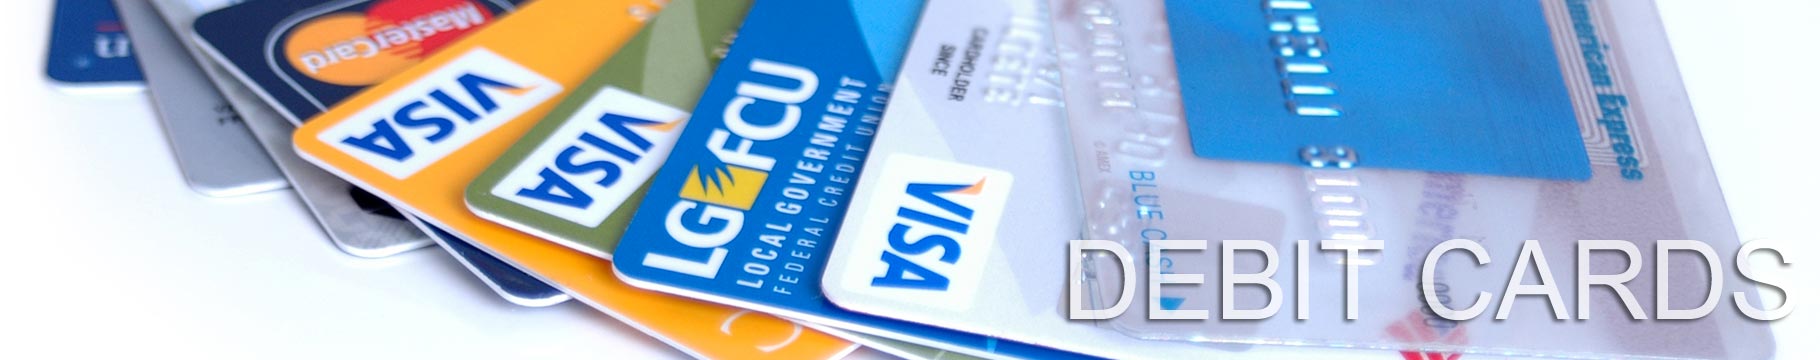 Debit and credit cards